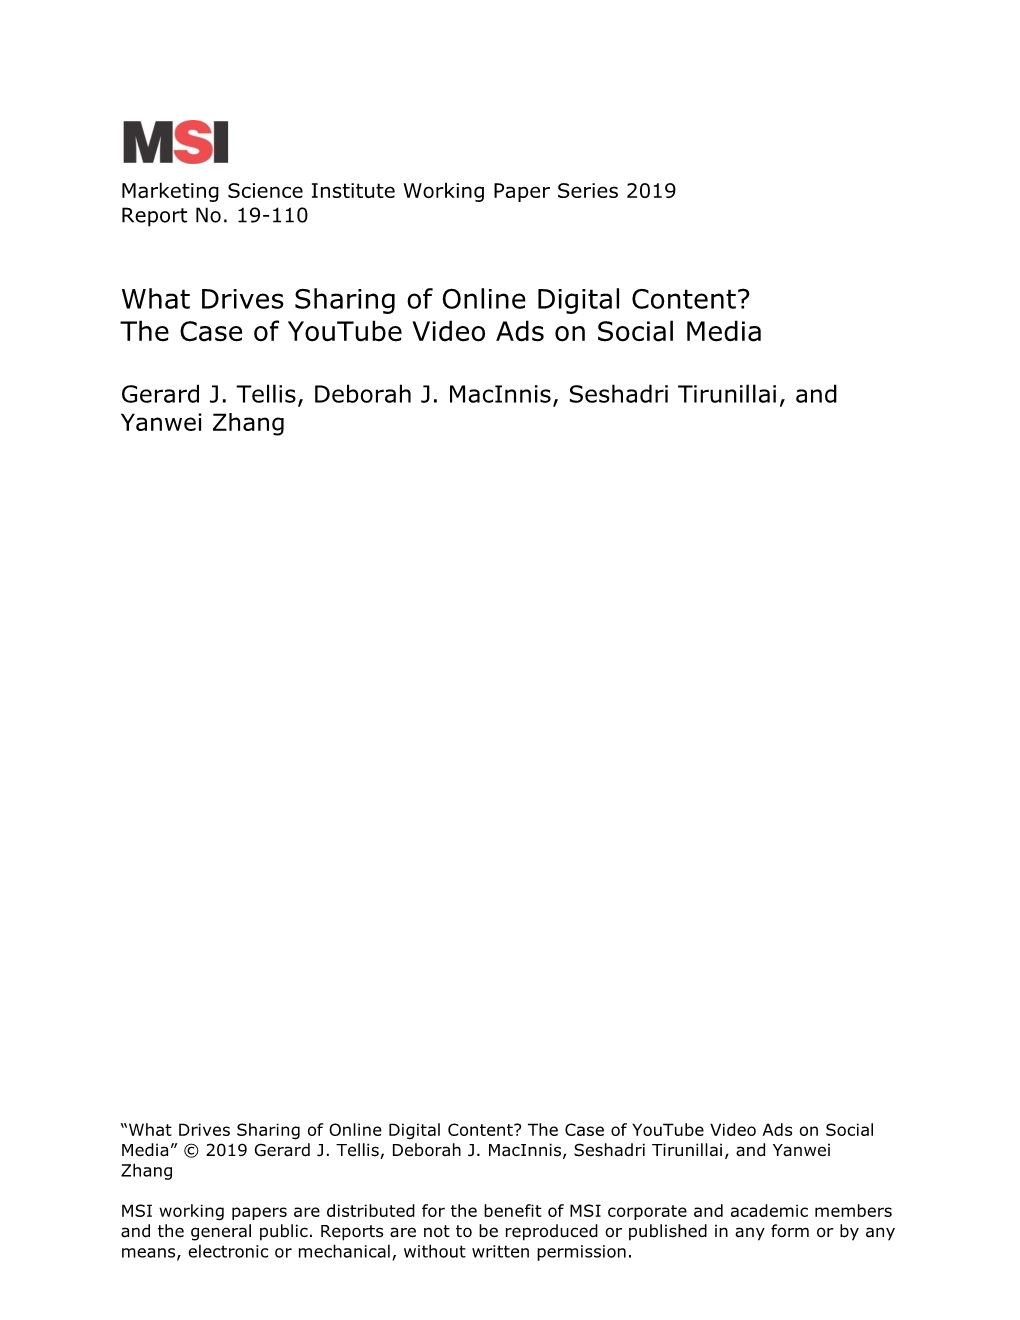 What Drives Sharing of Online Digital Content? the Case of Youtube Video Ads on Social Media